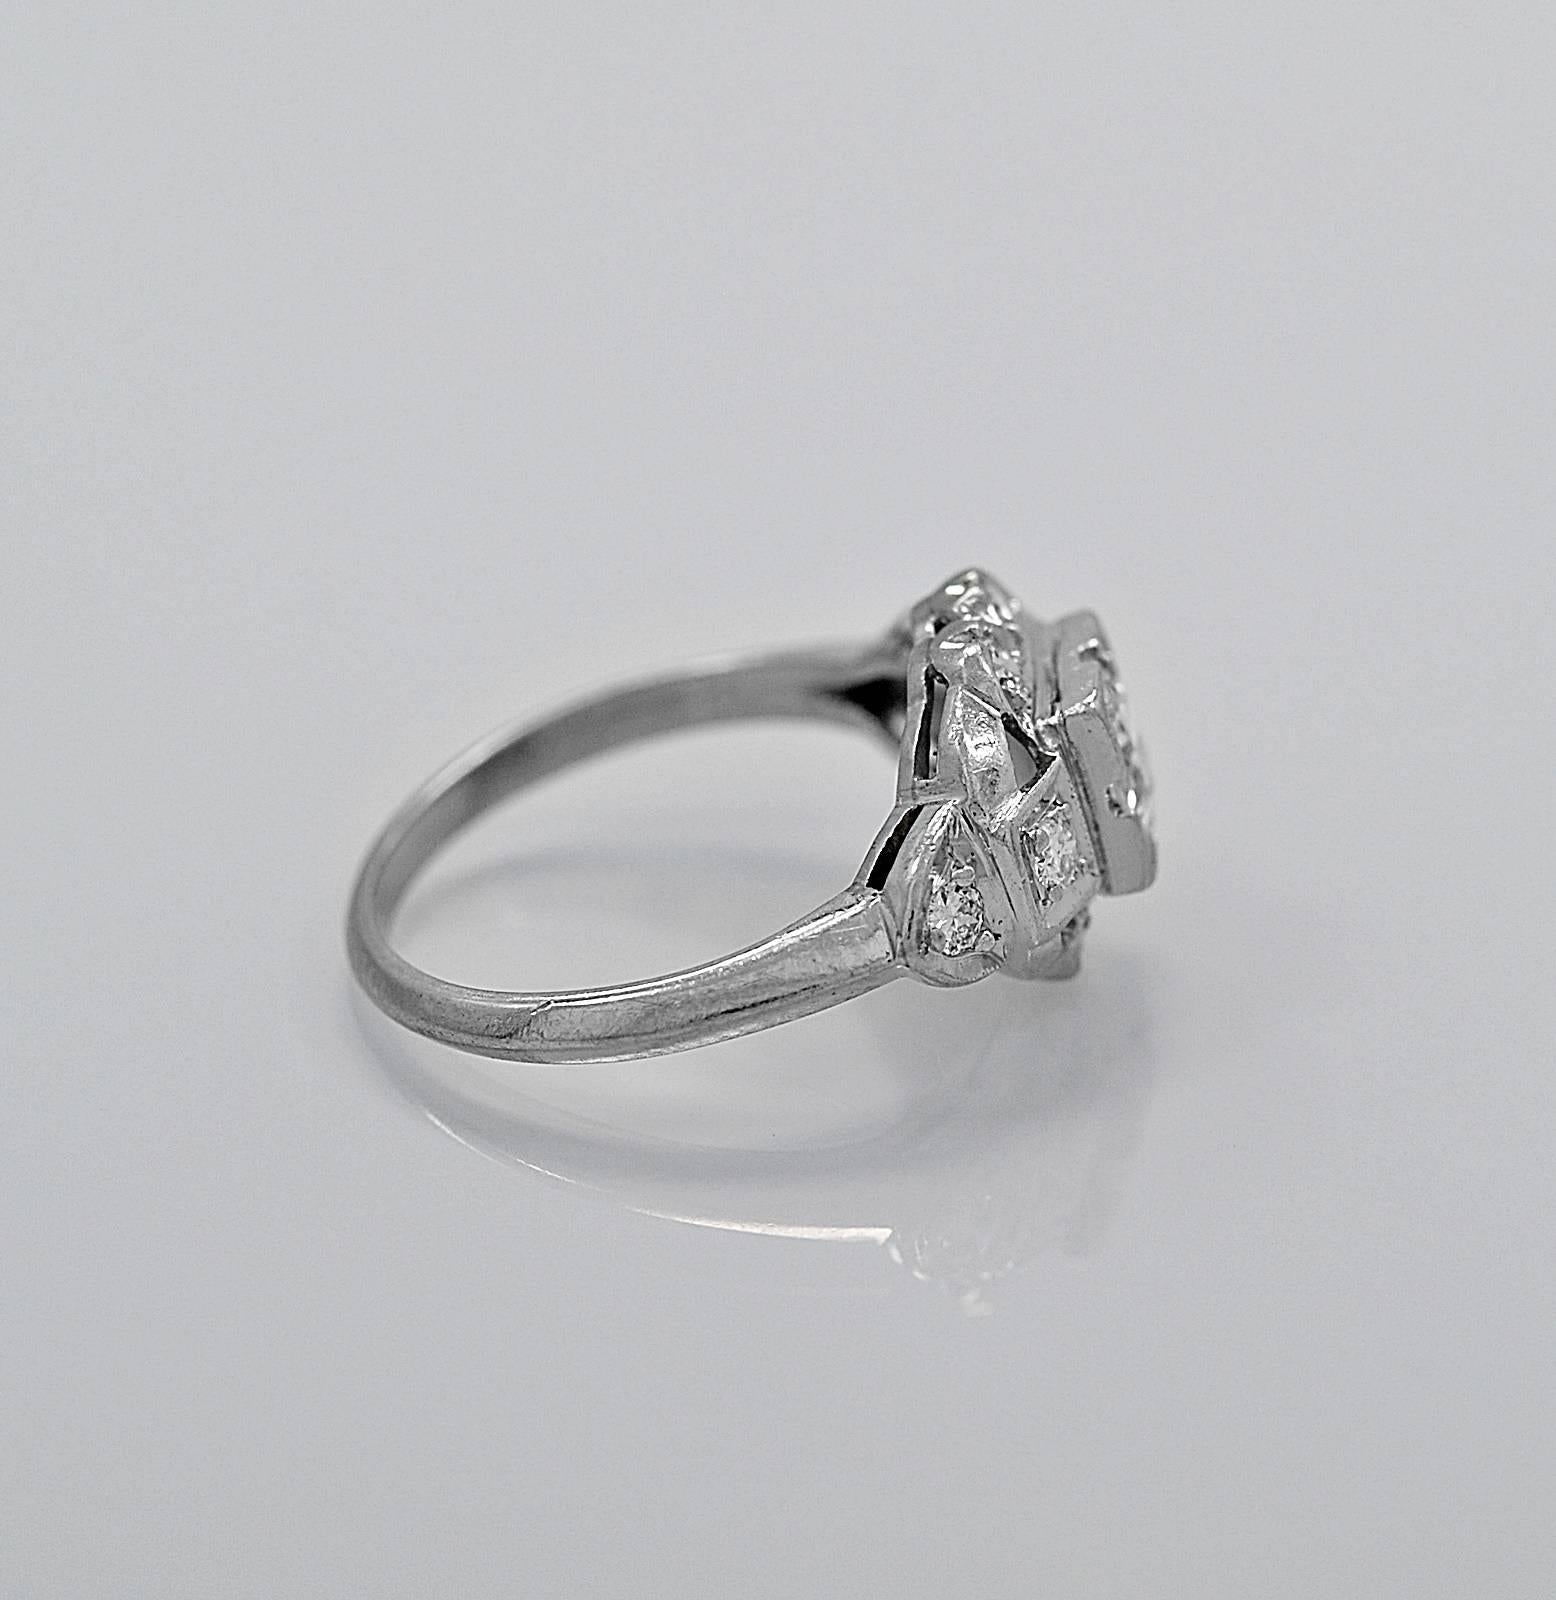 This Art Deco diamond antique engagement ring or fashion ring is crafted in platinum featuring a .38ct. apx. European cut diamond with I color and SI1 clarity. The accenting .20ct. T.W. apx. diamonds have scalloped edges on the north and south of